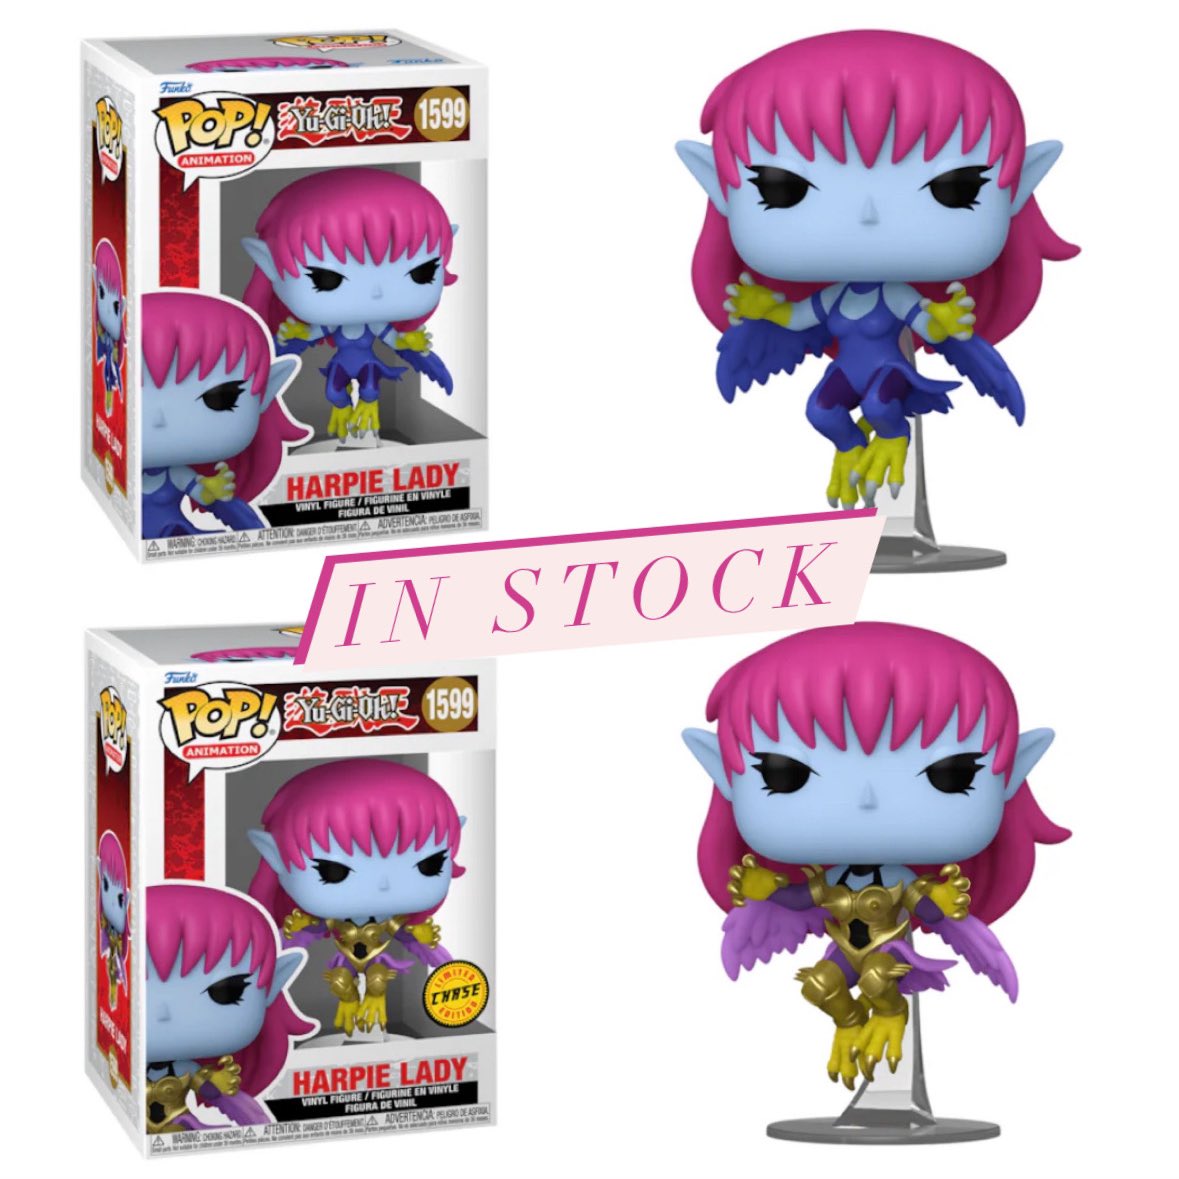 Harpie Lady Chase bundle is in stock and shipping out now at the link below!
Linky ~ bit.ly/3Qq5qnW
#Ad #YuGiOh #FPN #FunkoPOPNews #Funko #POP #POPVinyl #FunkoPOP #FunkoSoda